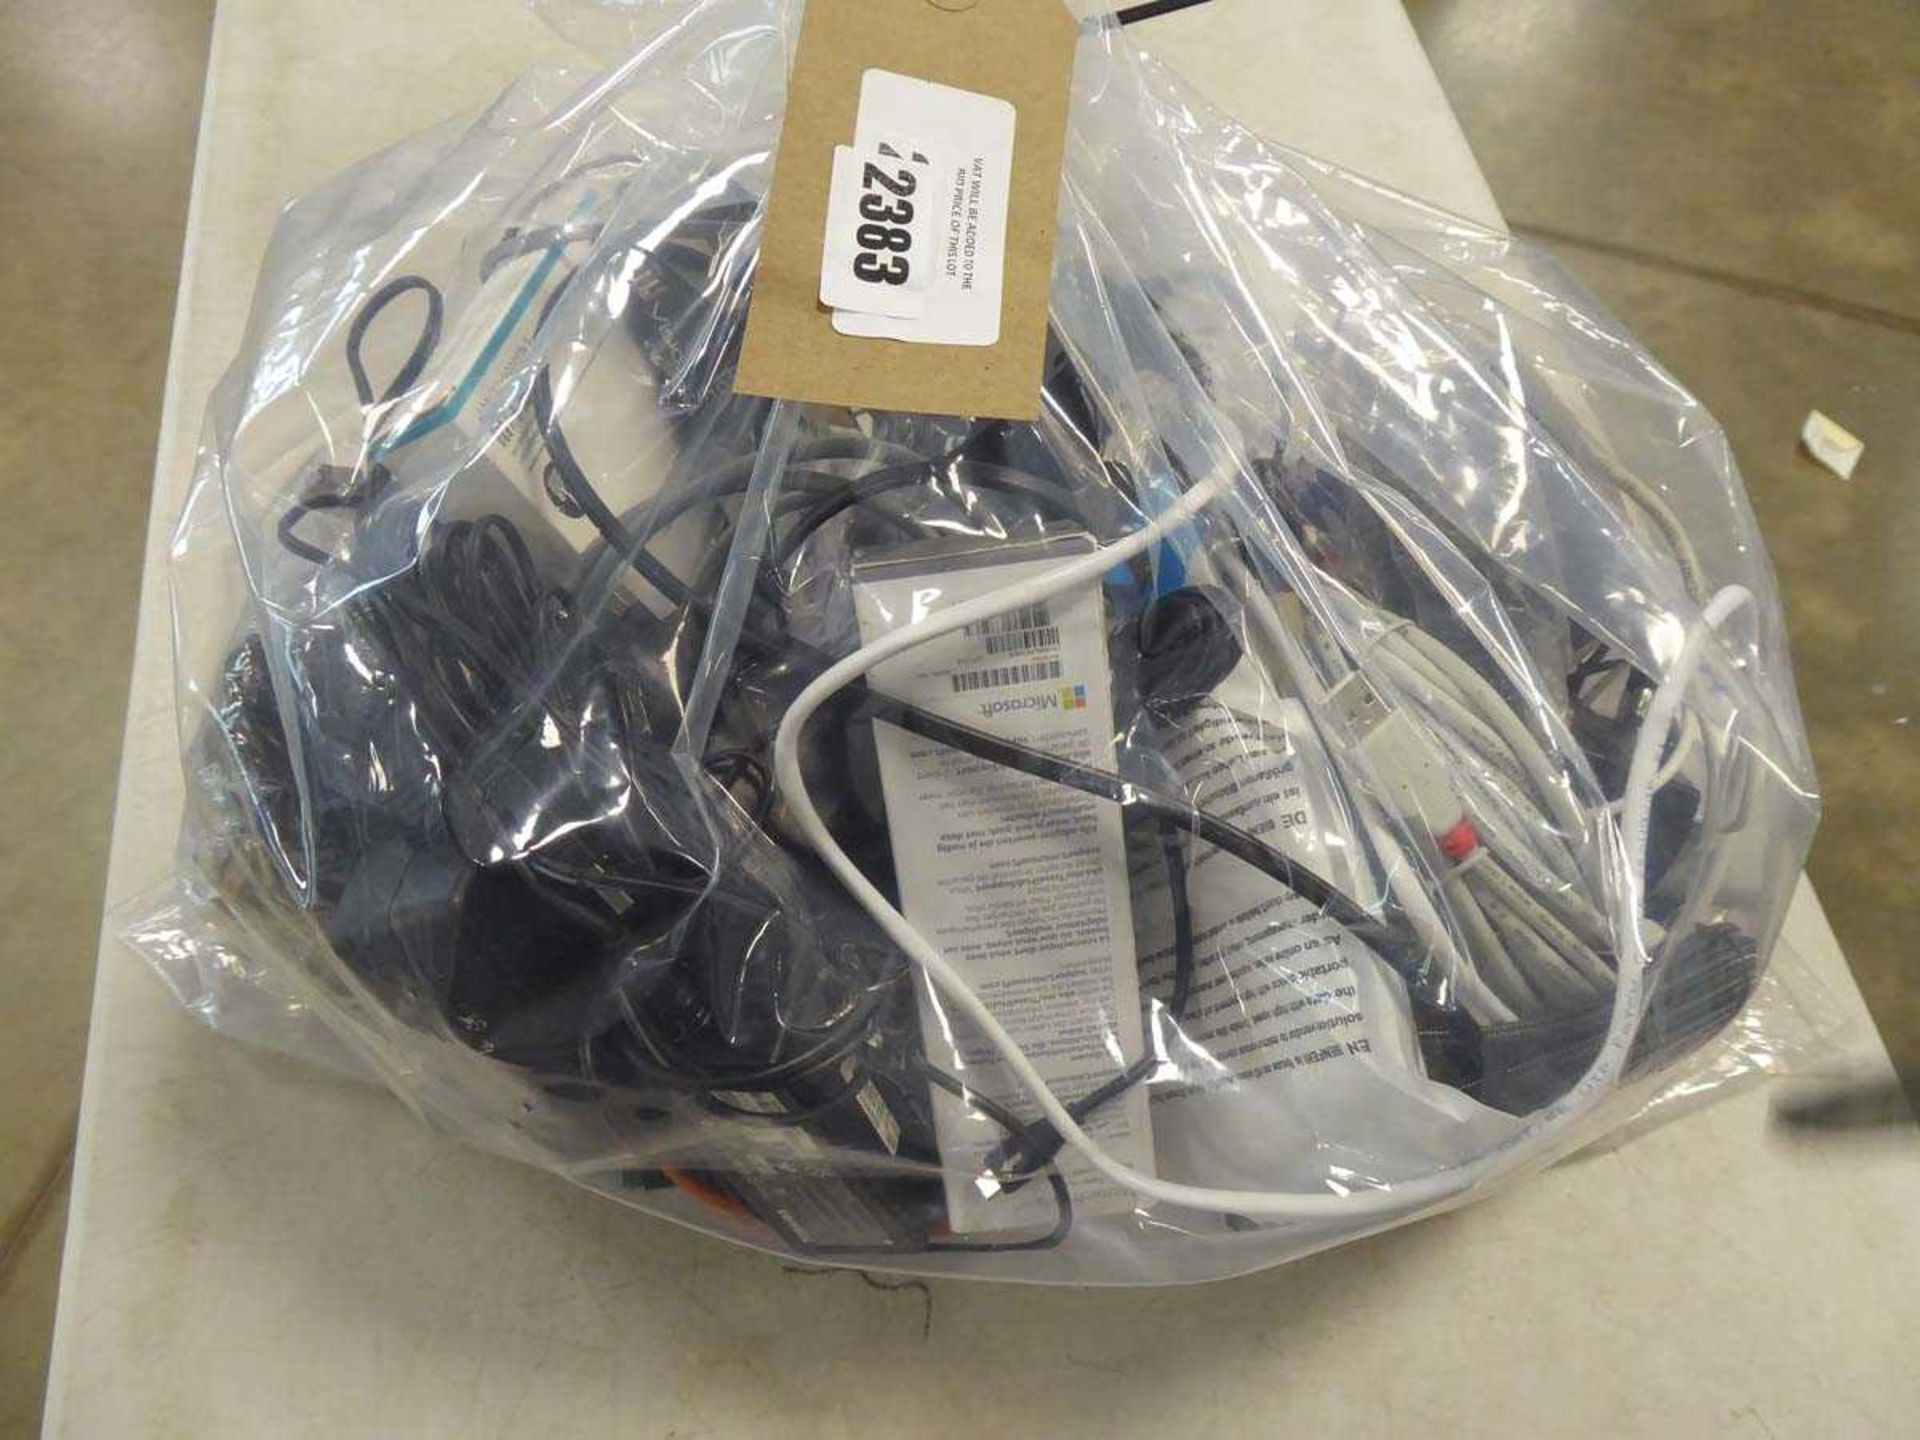 +VAT Bag containing cables, leads and PSUs